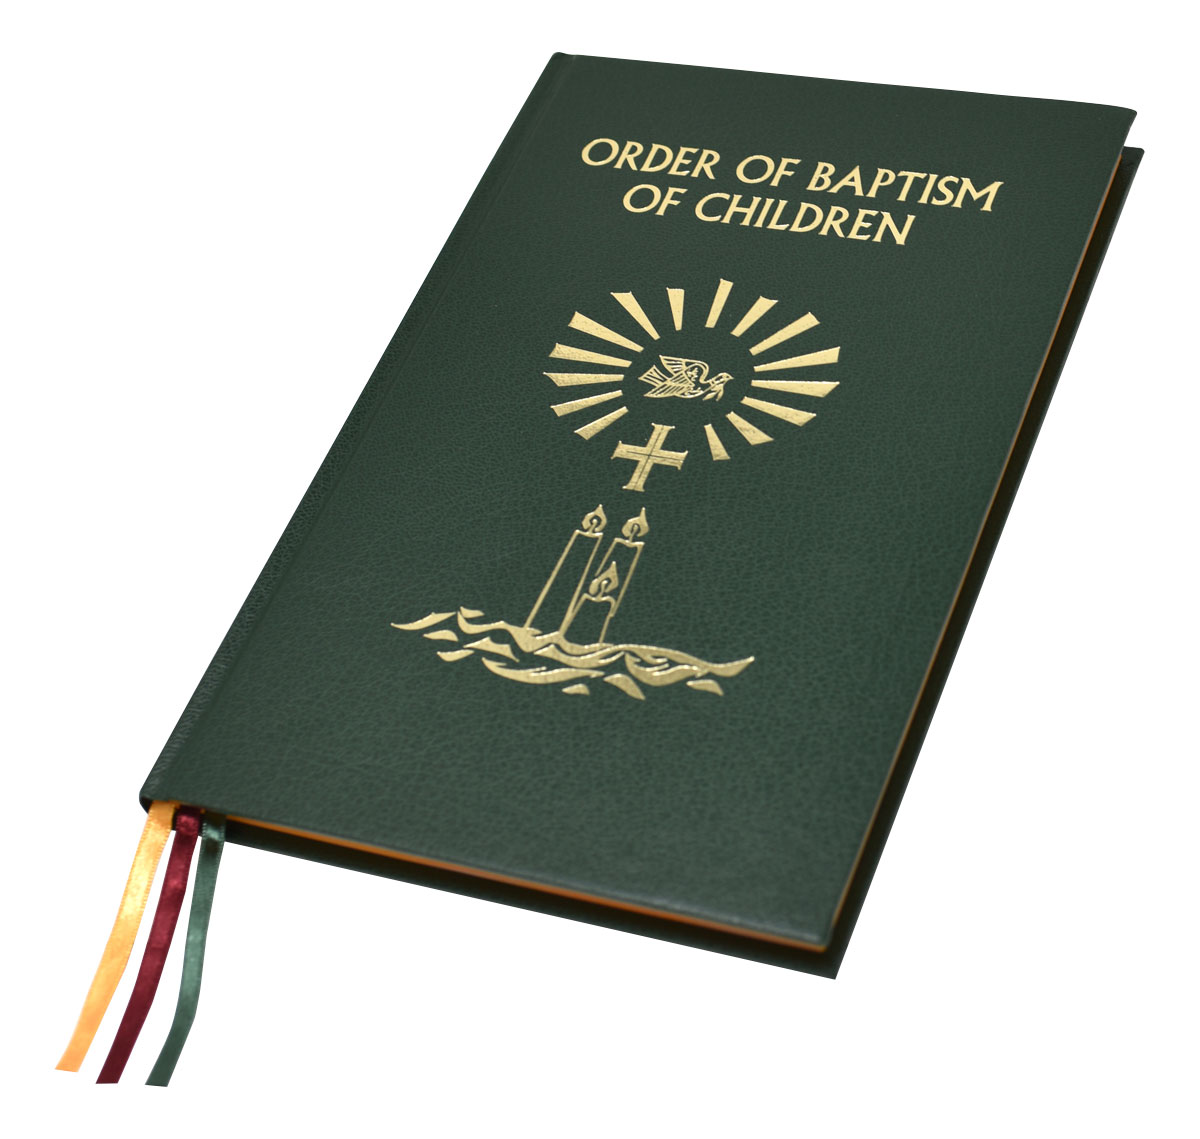 Order of Baptism for Children by Catholic Book Co. #136/22